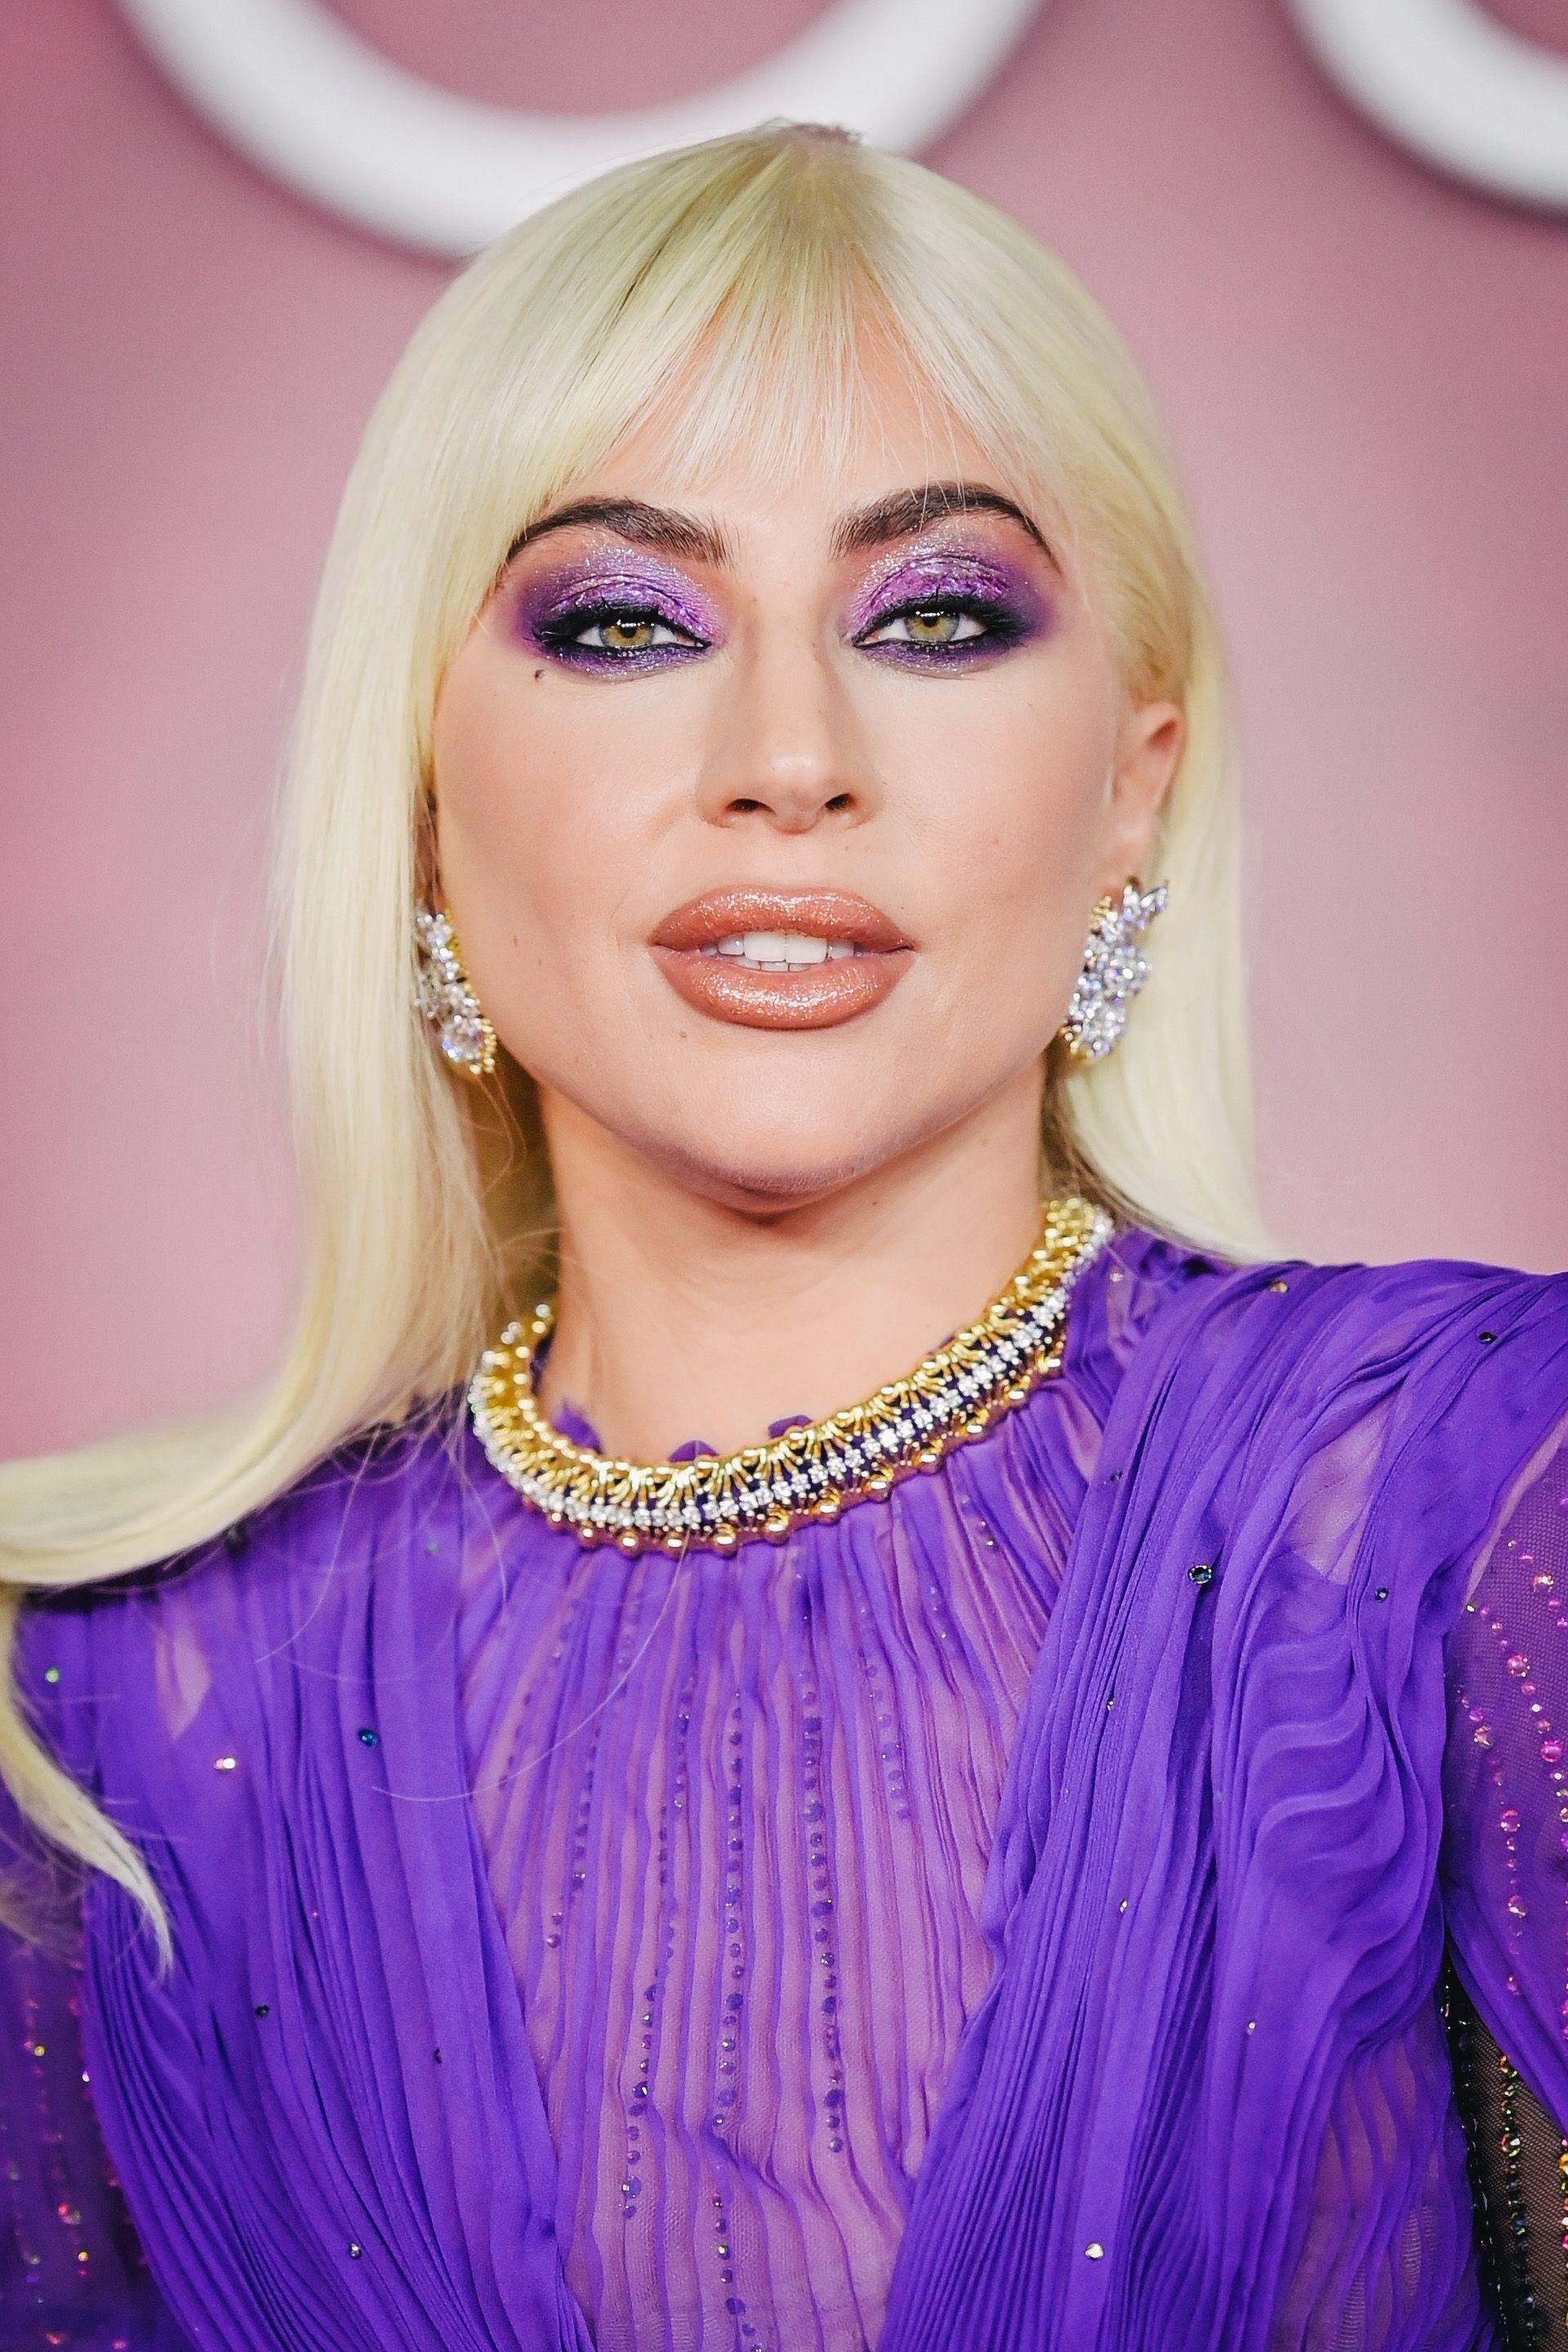 A close-up of Gaga&#x27;s makeup, in which she has purple shimmer eyeshadow and a peach lip